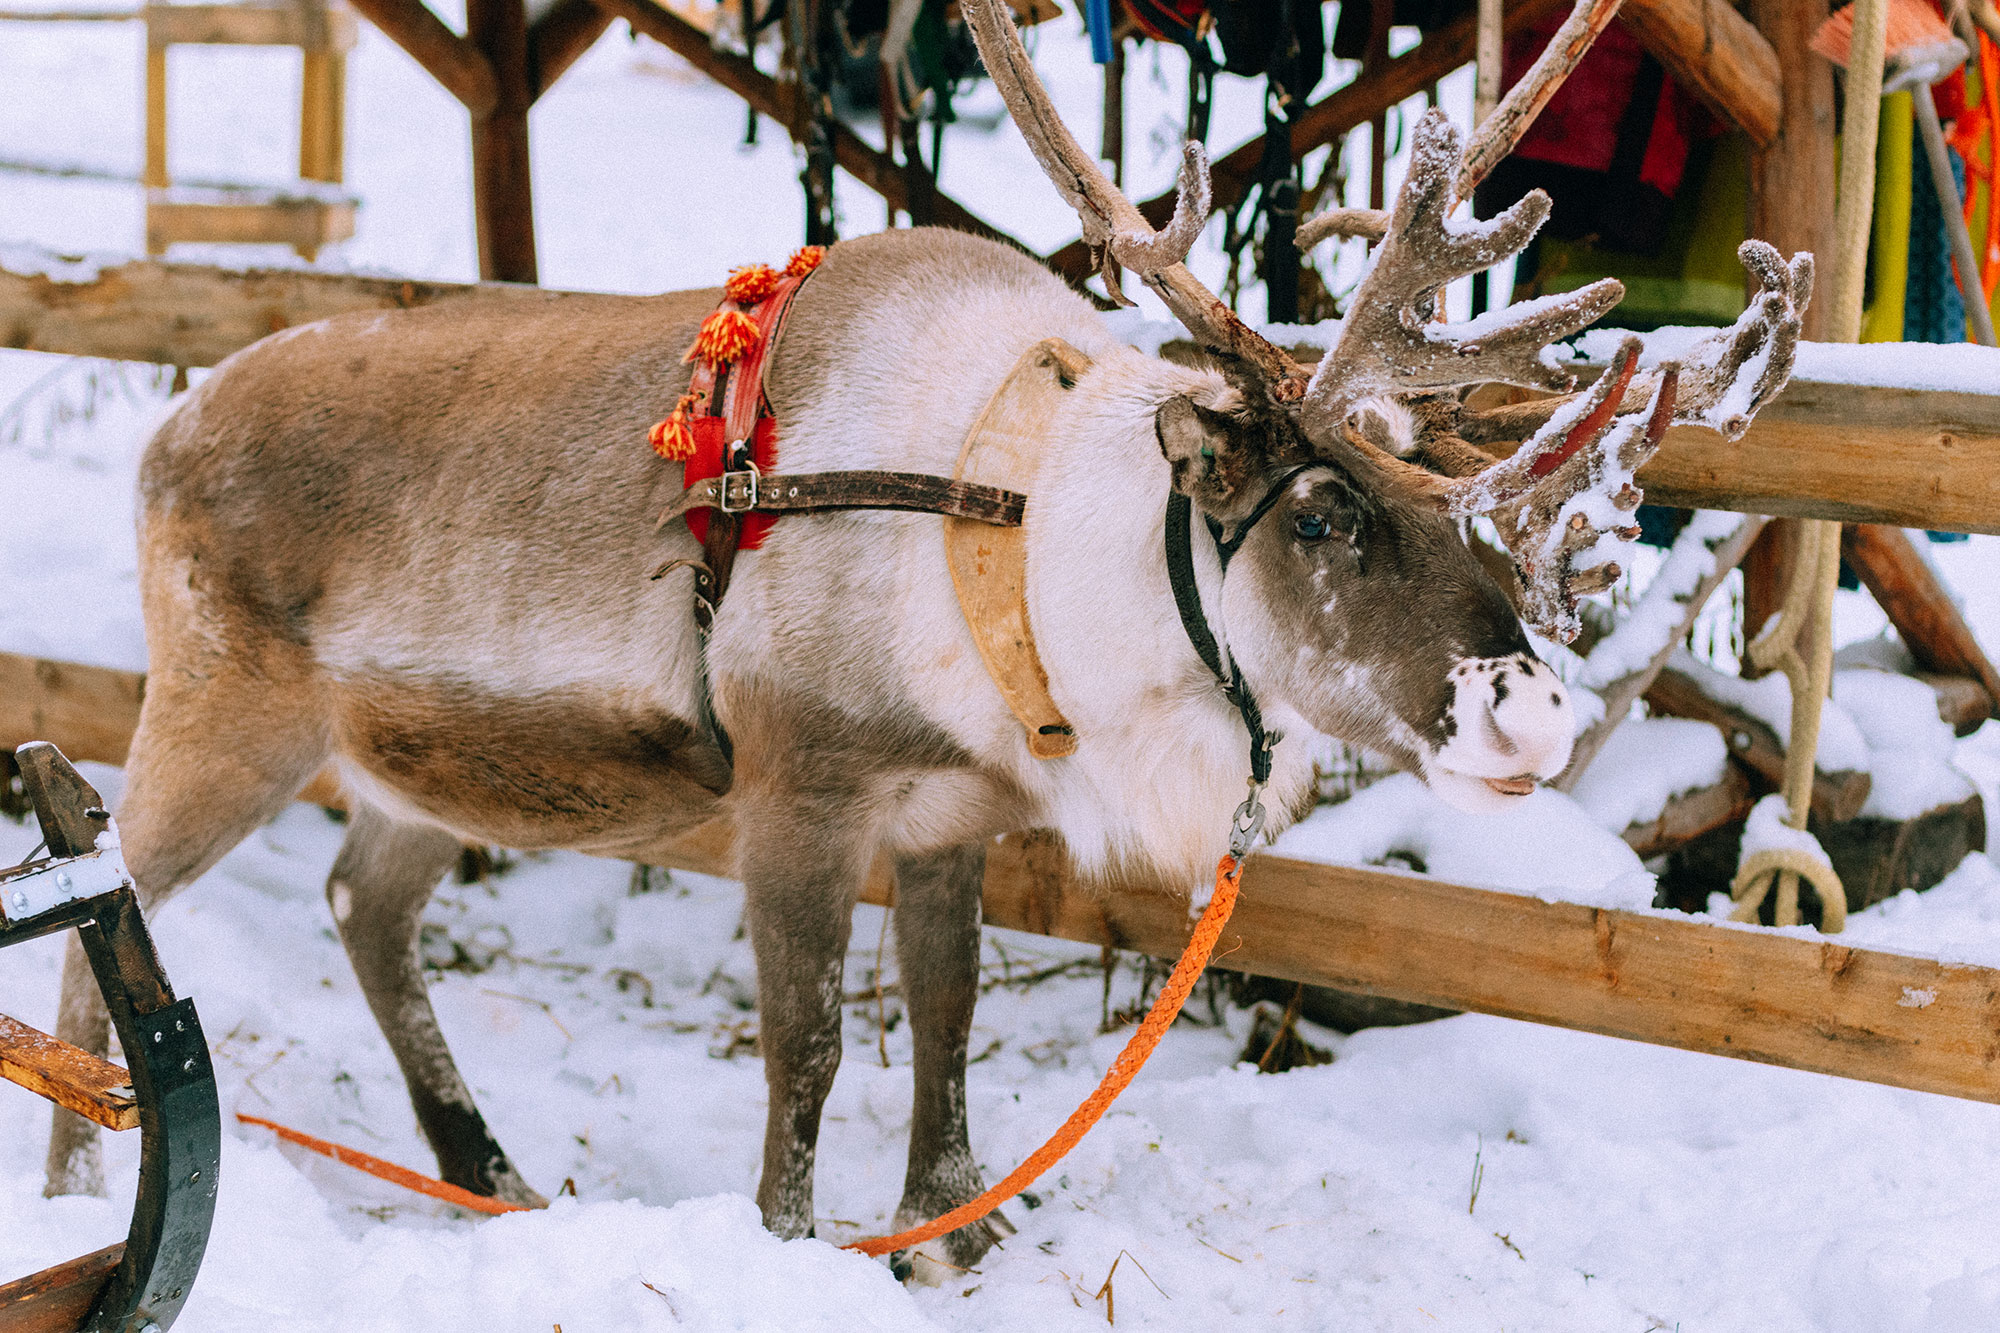 Reindeer ride w/ Levin Sammun-tupa Lappi / Quick Guide To Lappland, Finland by iHeartAlice.com - Travel, Lifestyle, Food & Fashionblog by Alice M. Huynh